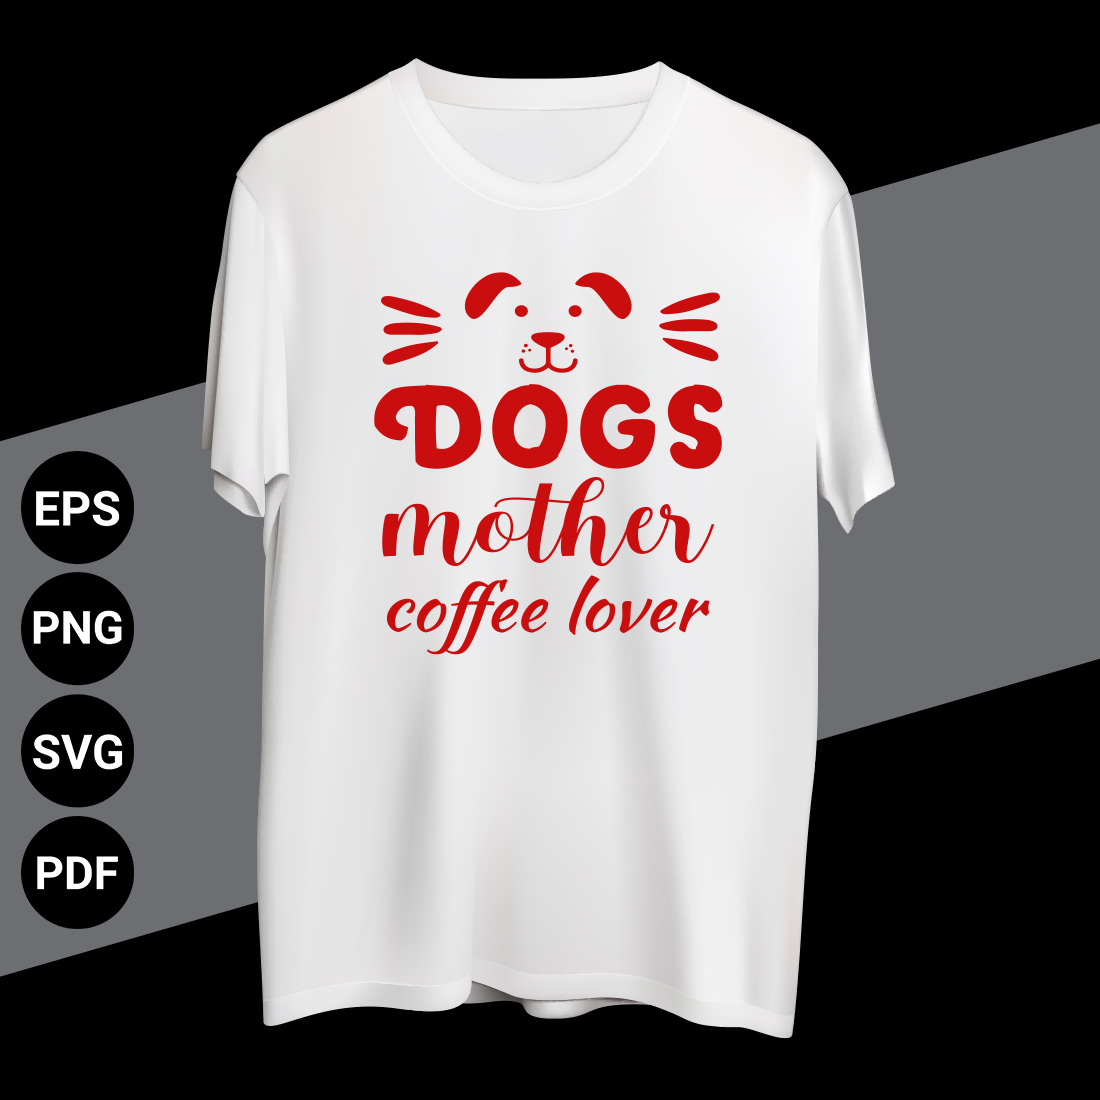 Dog books and coffee T-shirt design cover image.